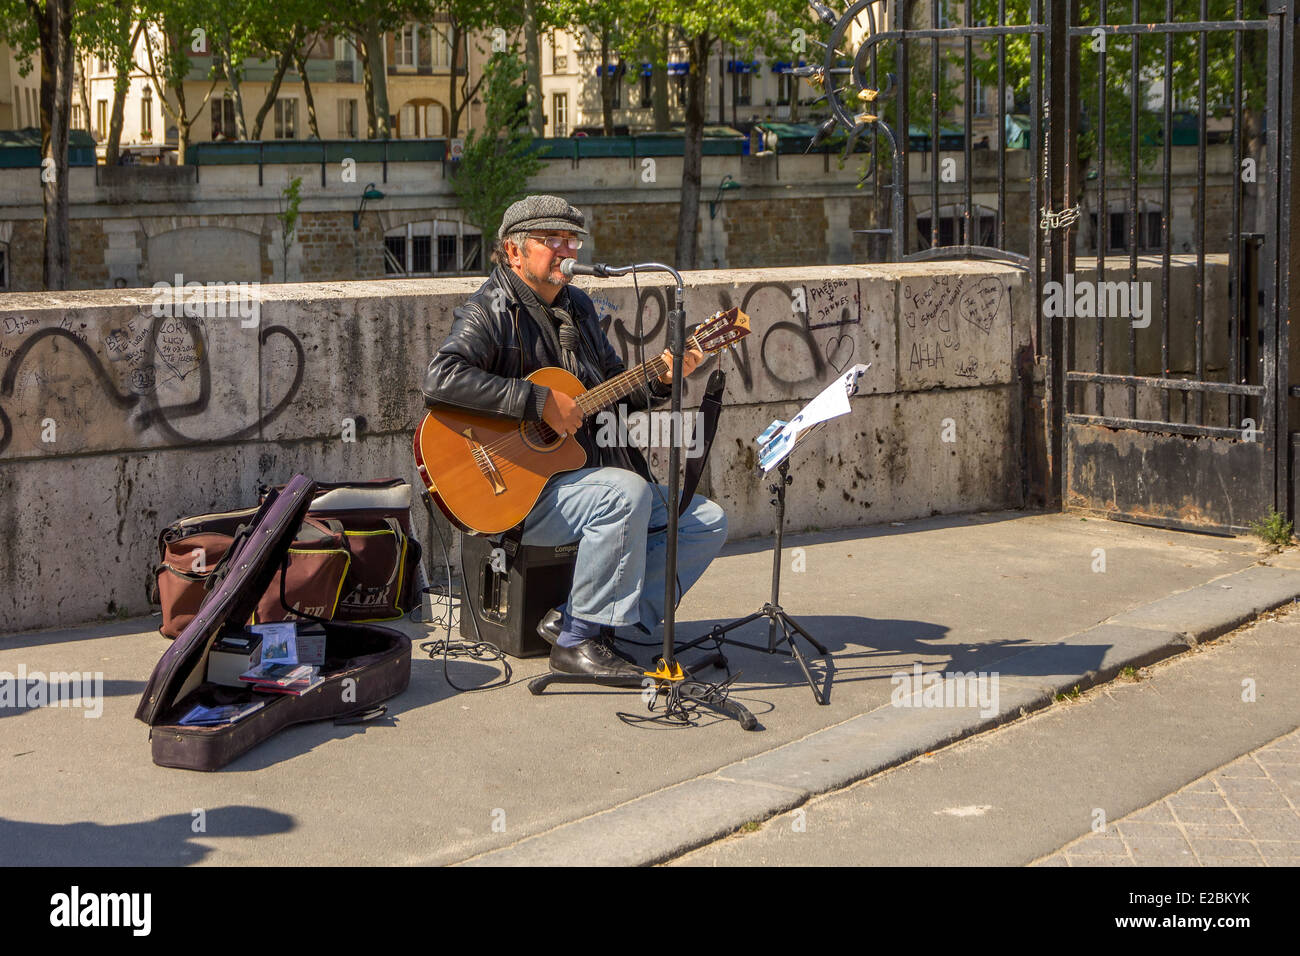 PARIS - MAY 3: Busker sings French chanson with a guitar on the waterfront near Notre Dame in Paris on 3 may 2014. Stock Photo